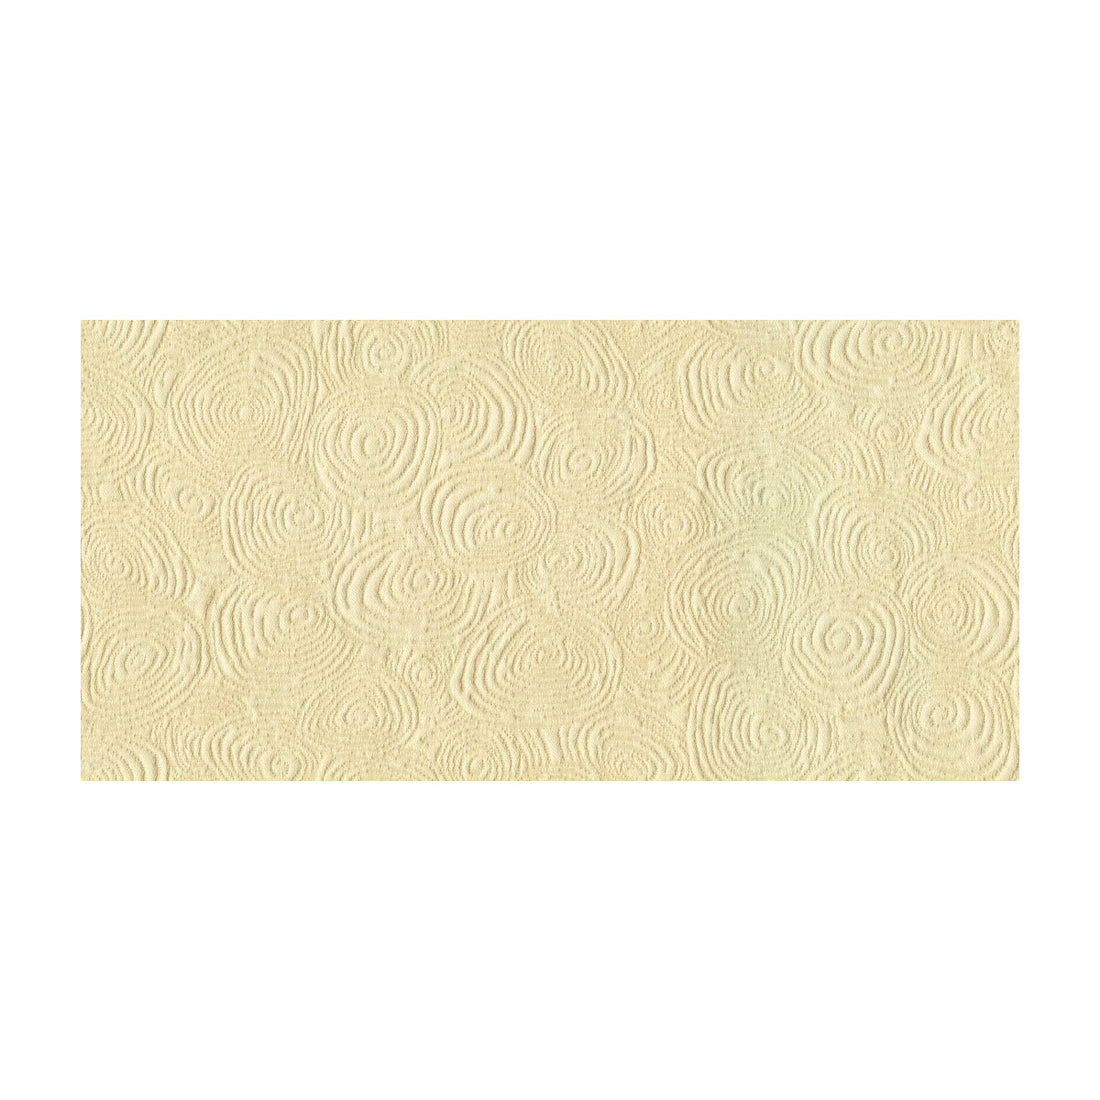 Hart fabric in shell color - pattern 33414.1.0 - by Kravet Basics in the Jeffrey Alan Marks Waterside collection